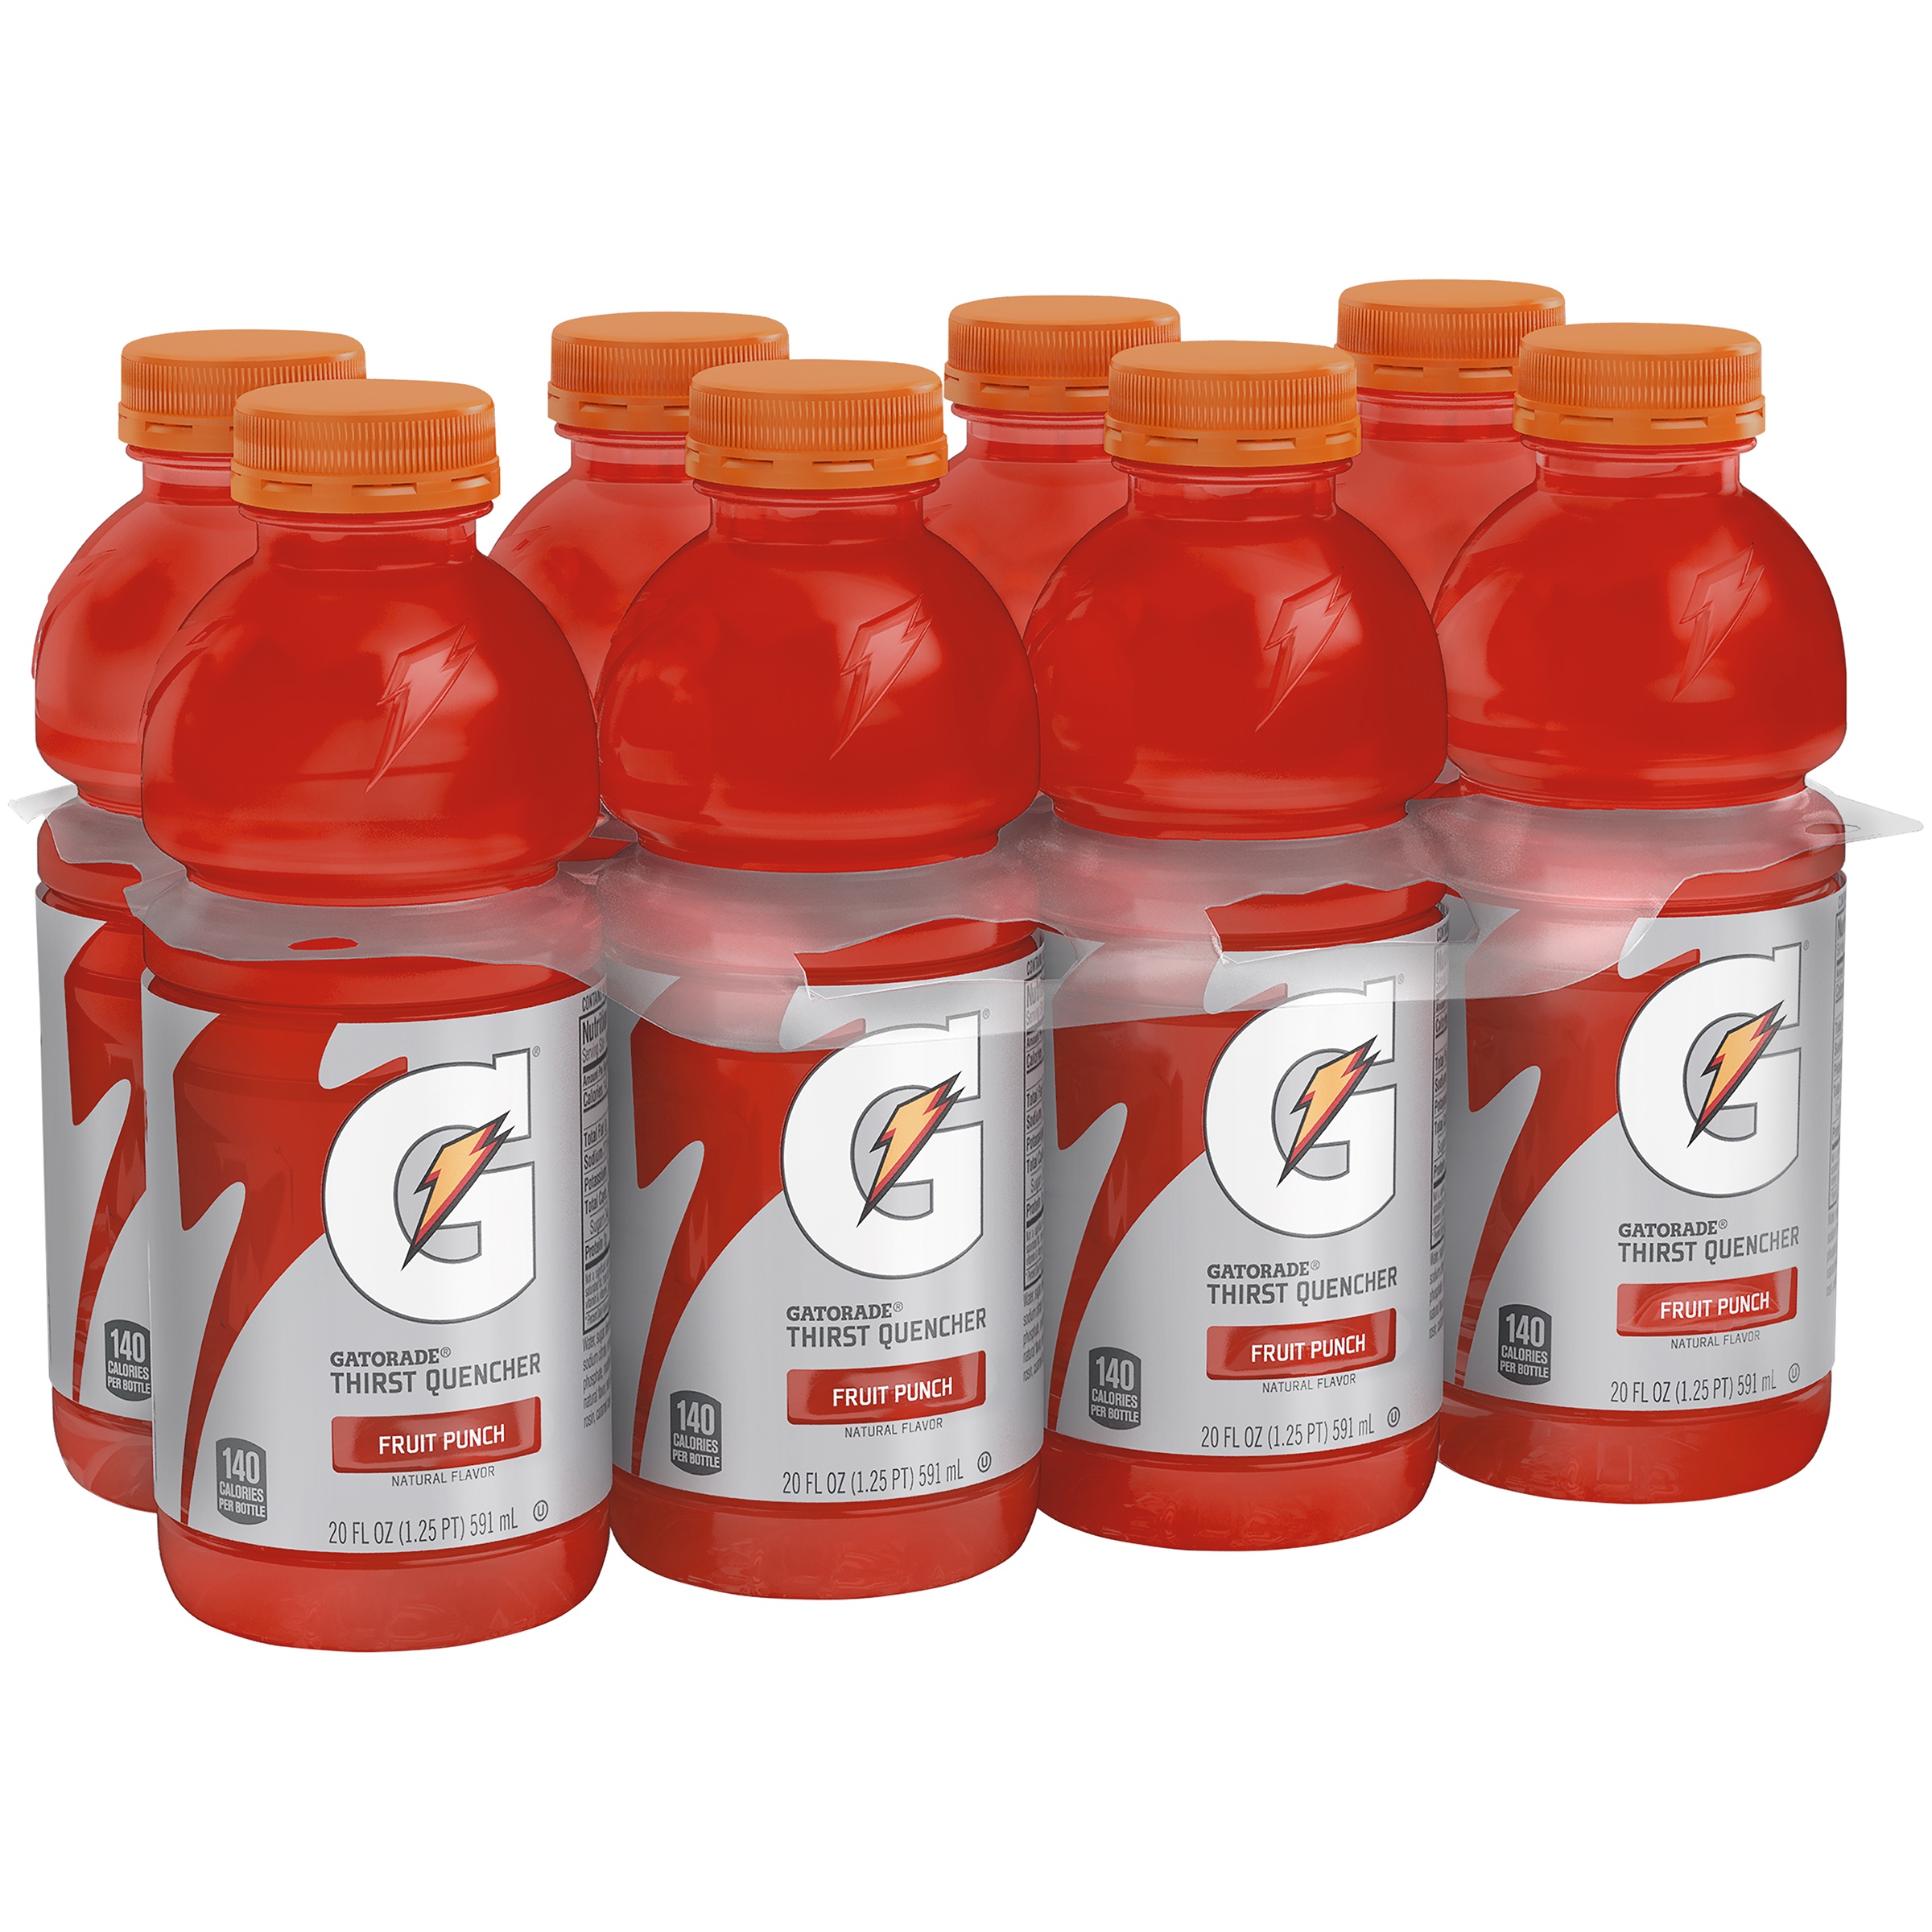 Gatorade Thirst Quencher, Fruit Punch Sports Drinks, 20 fl oz, 8 Count Bottles - image 2 of 9